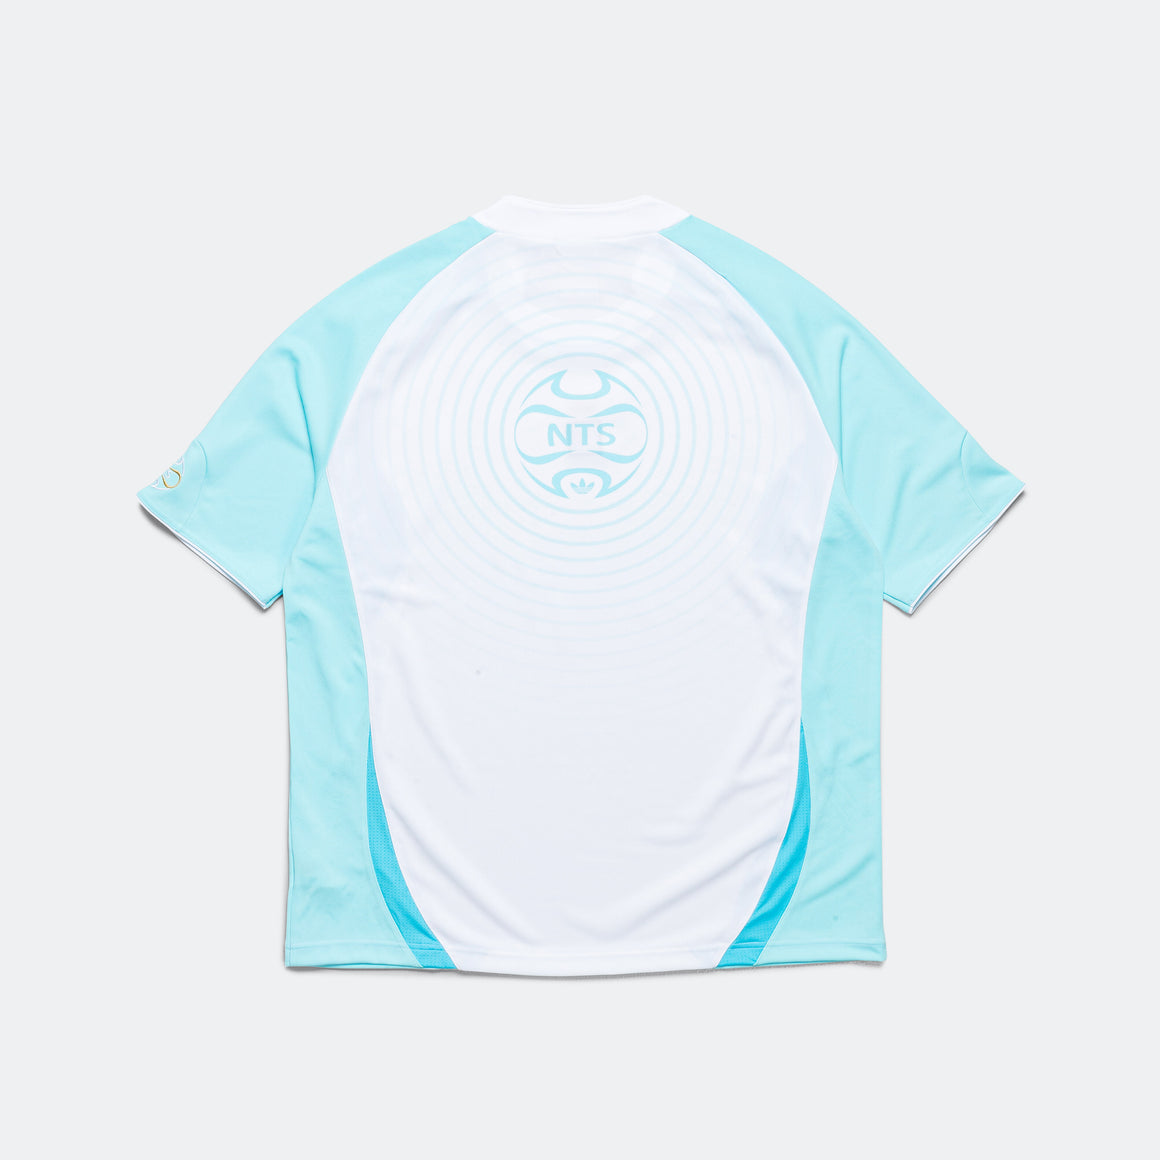 adidas - Track Jersey x NTS Radio - Bliss Blue/White - UP THERE